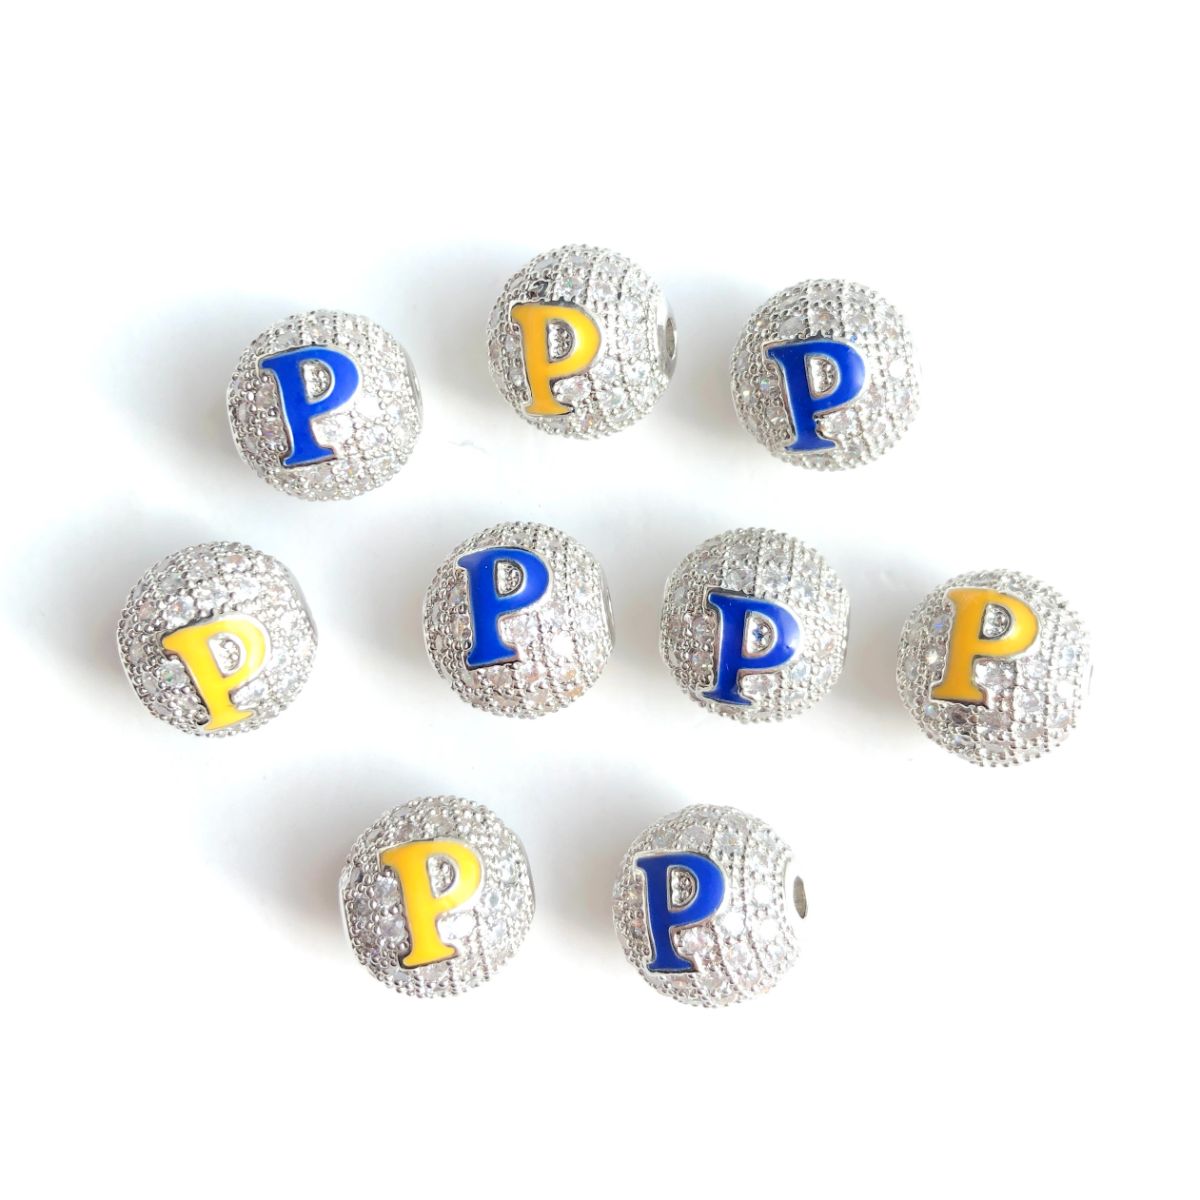 12pcs/lot 10mm Blue Yellow Enamel CZ Paved Greek Letter "Σ", "Γ", "Ρ" Ball Spacers Beads 12 Silver Ρ CZ Paved Spacers 10mm Beads Ball Beads Greek Letters New Spacers Arrivals Charms Beads Beyond